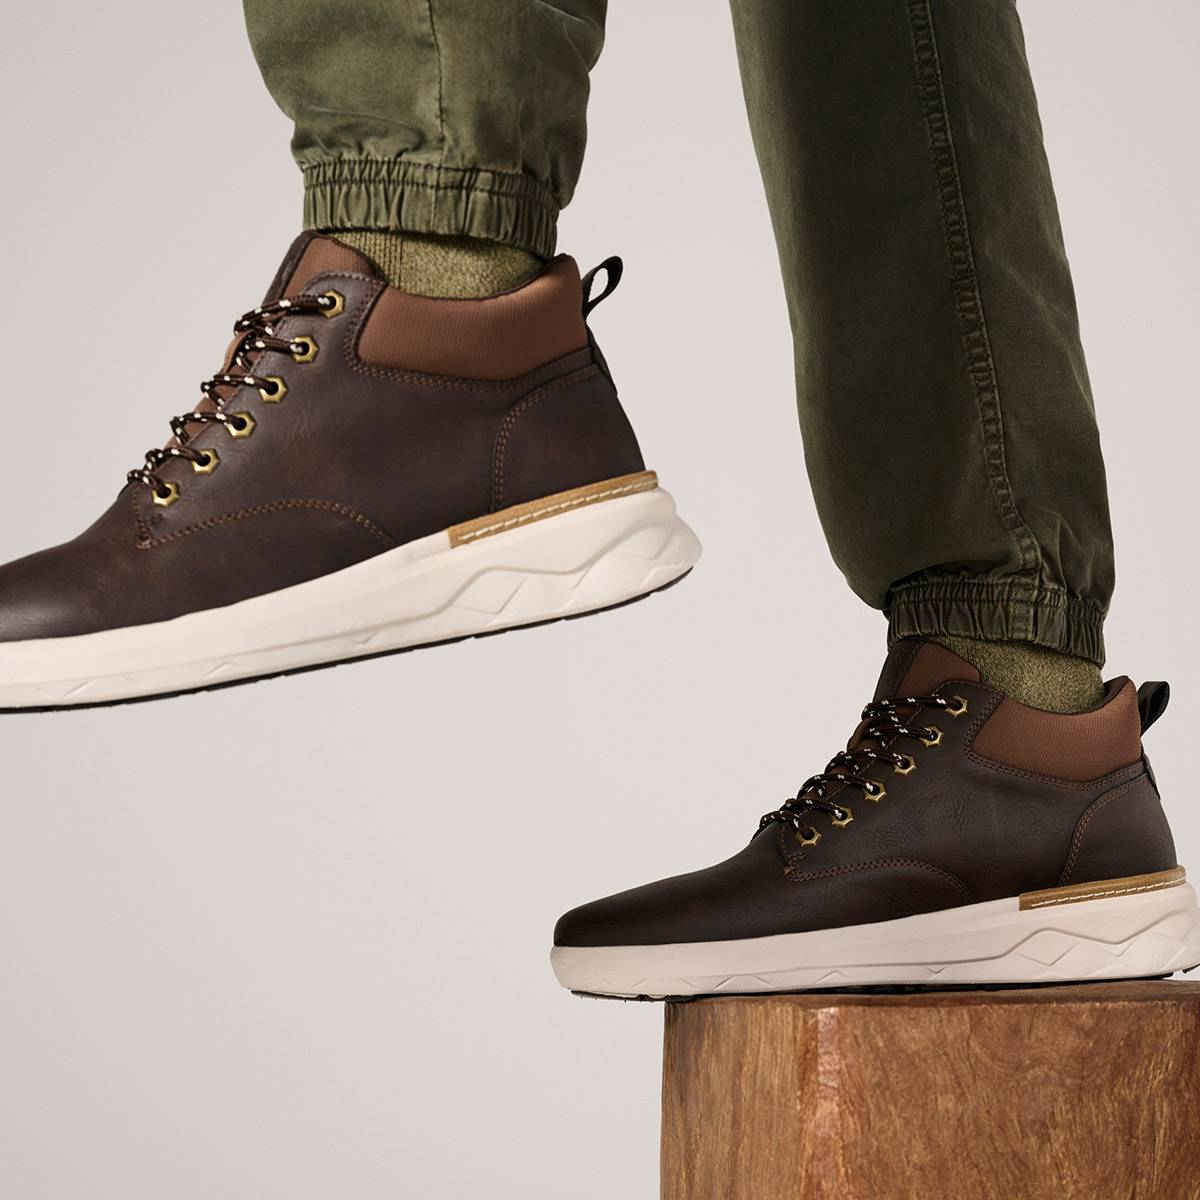 Brown leather lace-up boots. Shop footwear